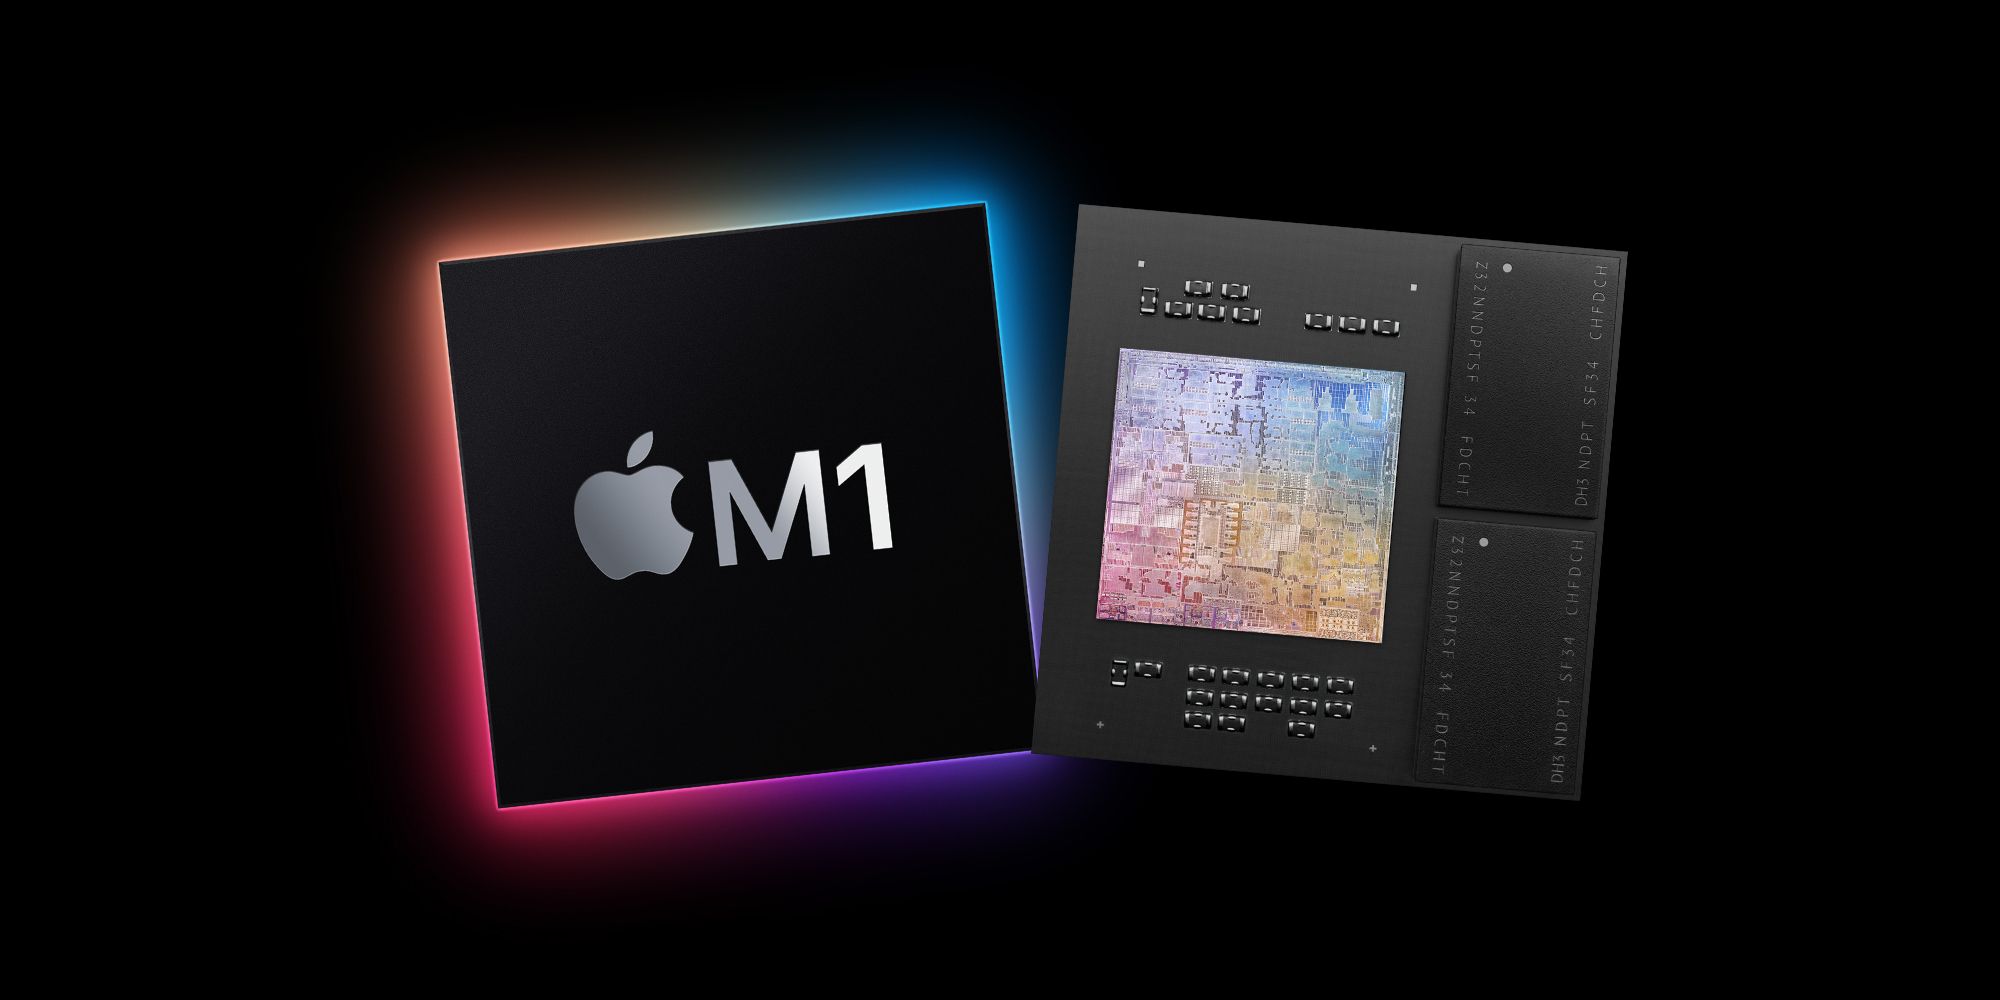 Official renders of Apple M1 chip